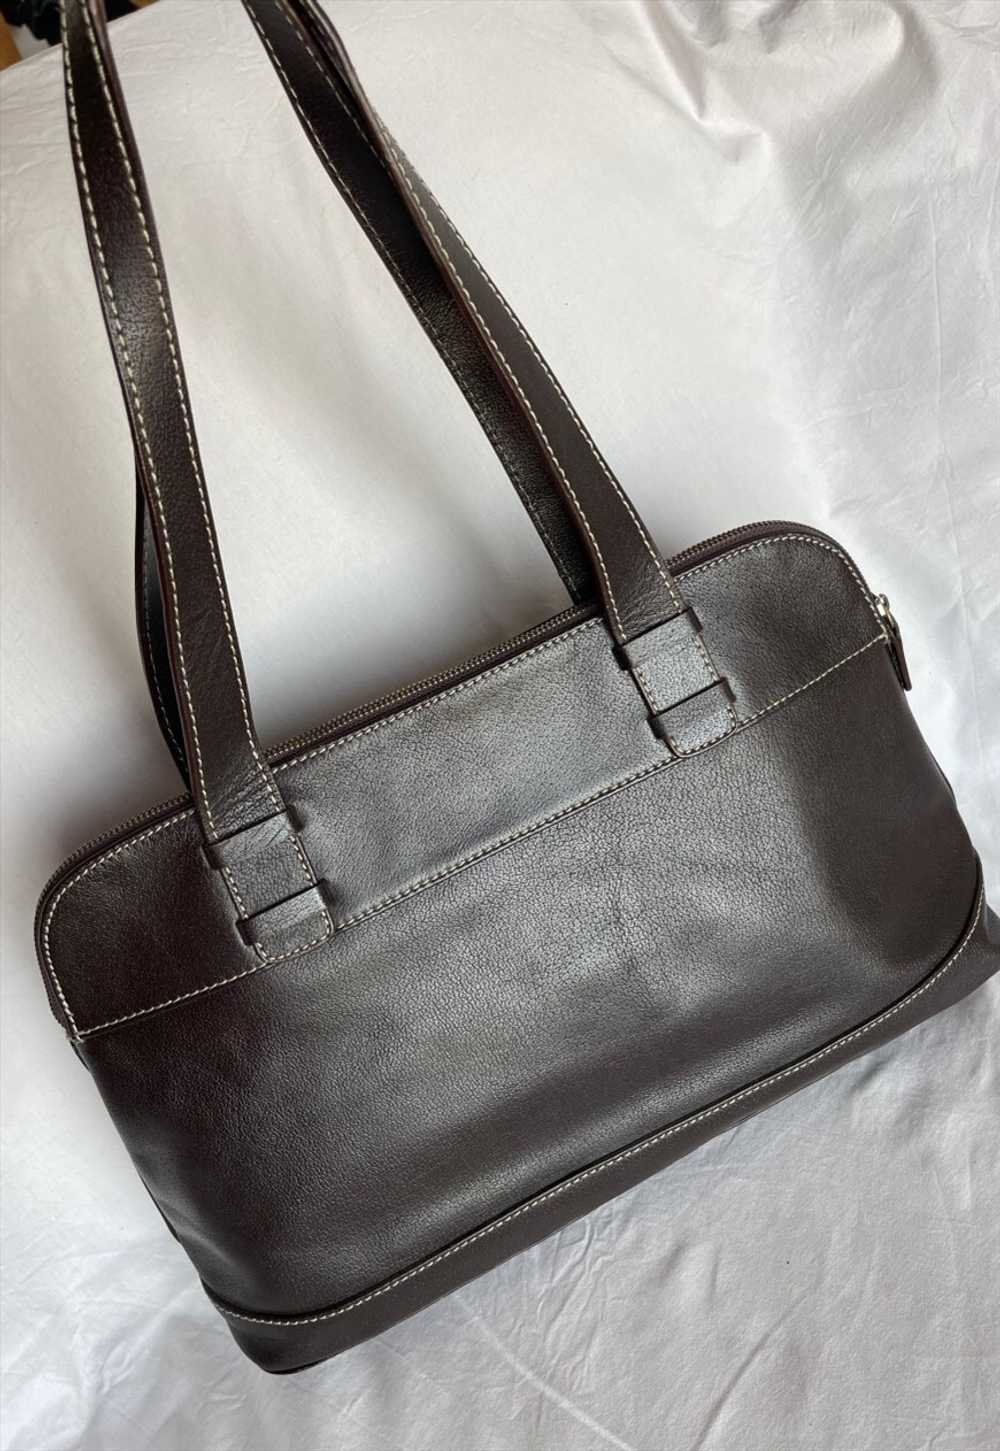 Vintage Tanner Tailor Chocolate Leather Bag - image 3